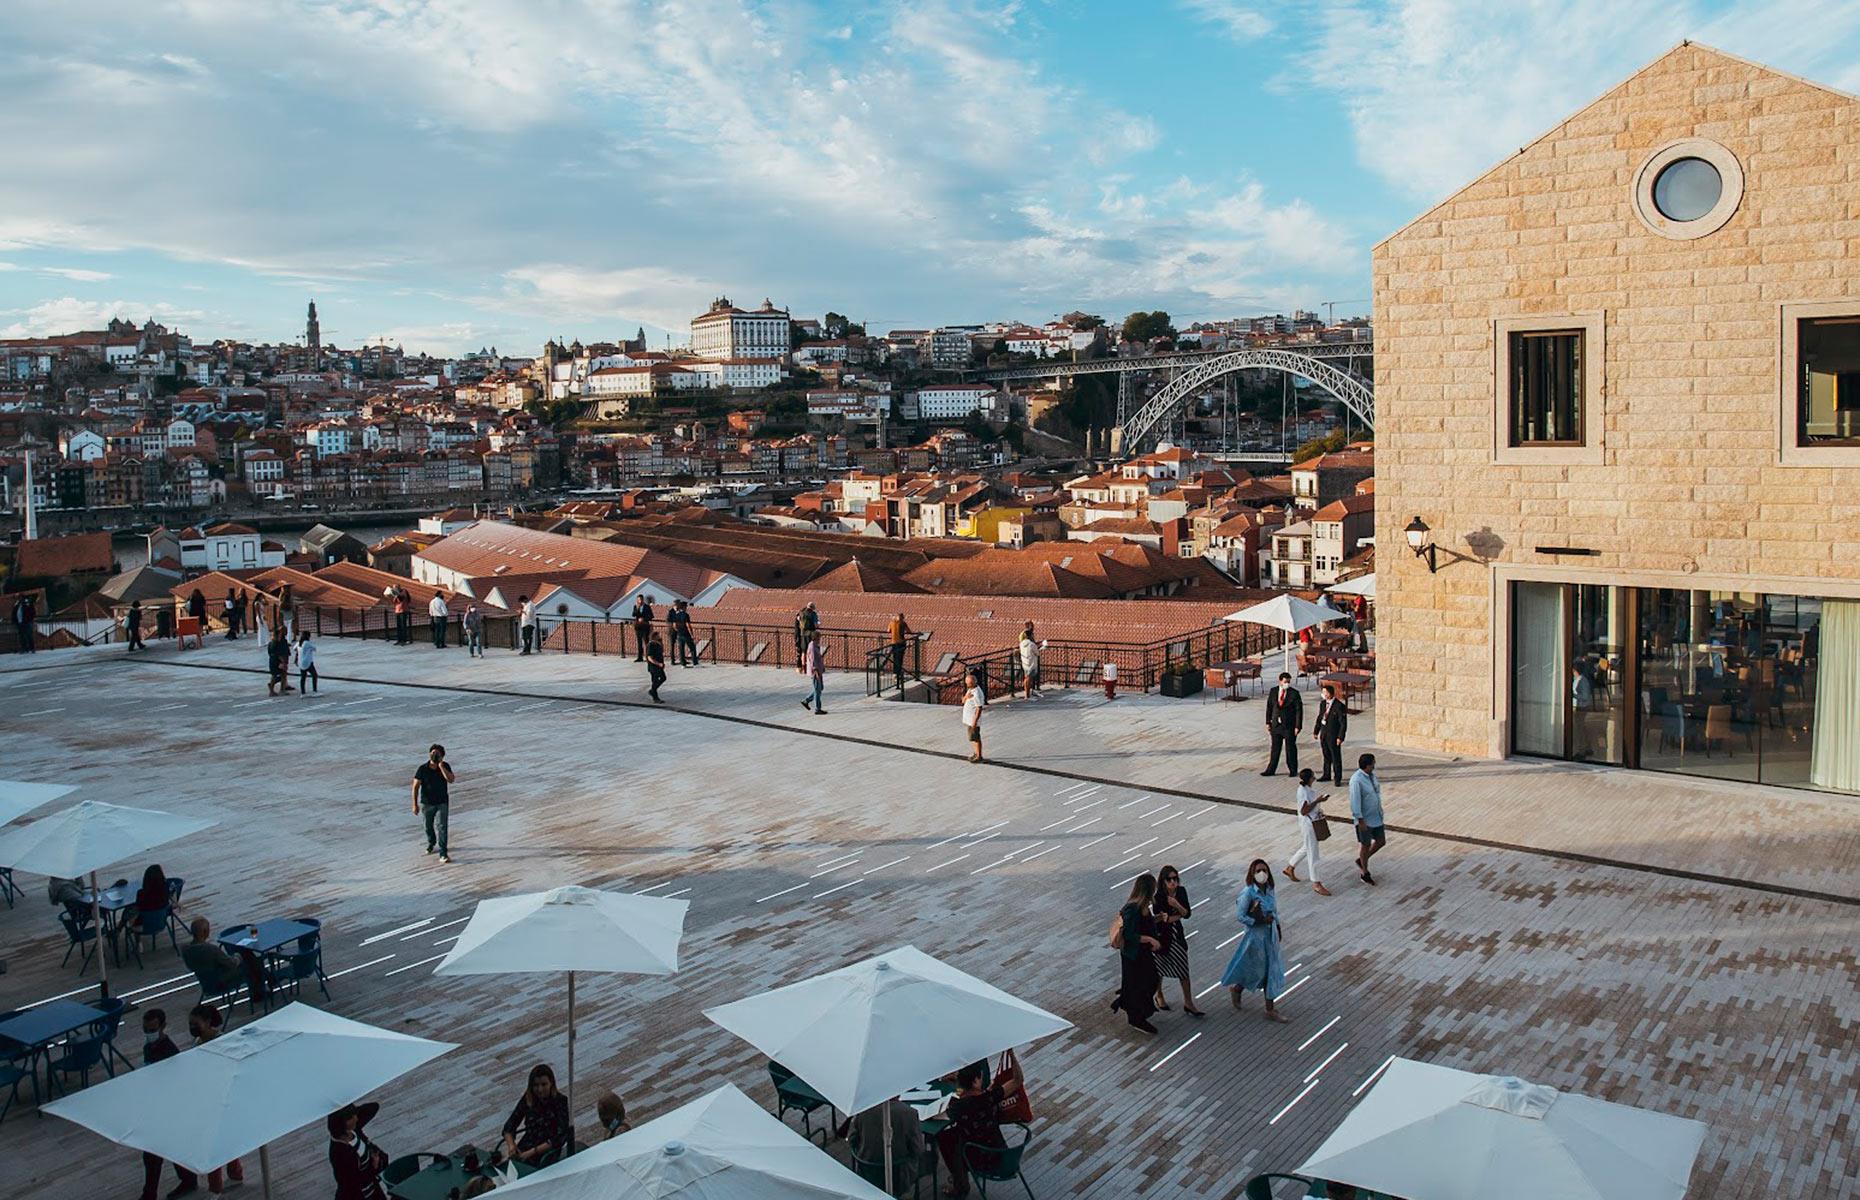 <p>From its vantage point on the hillside of Vila Nova de Gaia, <a href="https://www.wow.pt/en">the WOW district</a> gives visitors the chance to soak up breathtaking views of the landmark Dom Luís I Bridge while immersing themselves in the world of Portuguese food and drink, sampling classic dishes and the best produce that showcases the region's gastronomic prowess. A network of dazzling new immersive centers, renovated old buildings, and interconnected open-air squares make this a great way to spend a few days in Porto.</p>